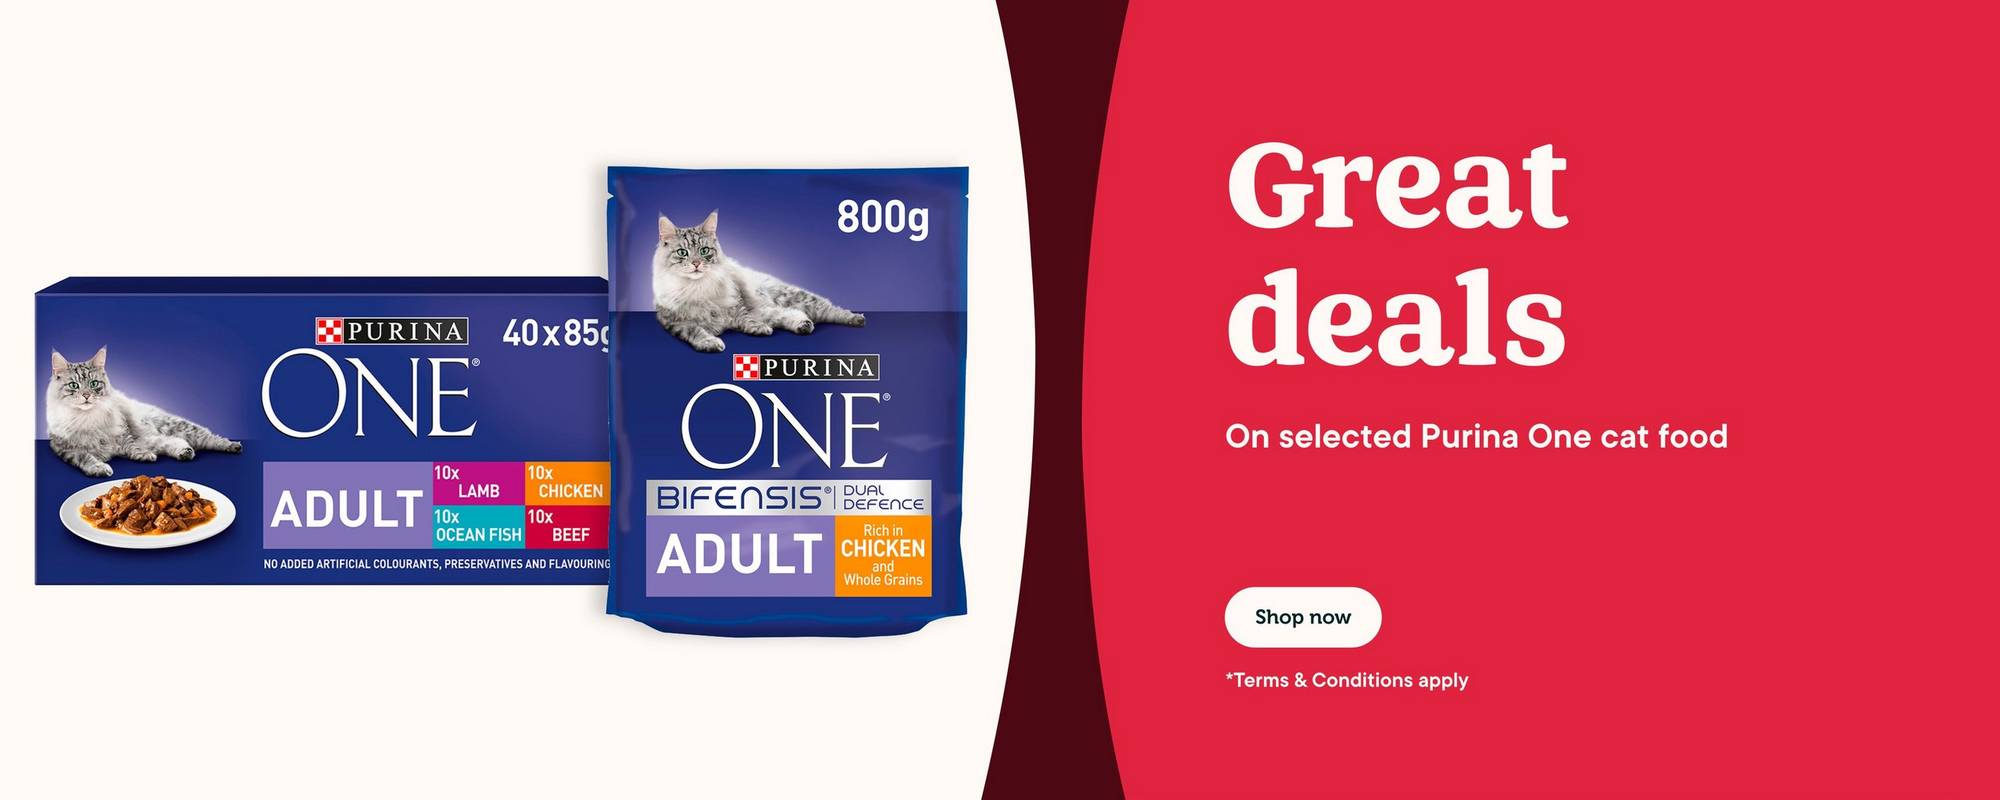 Great deals on selected Purina One cat food